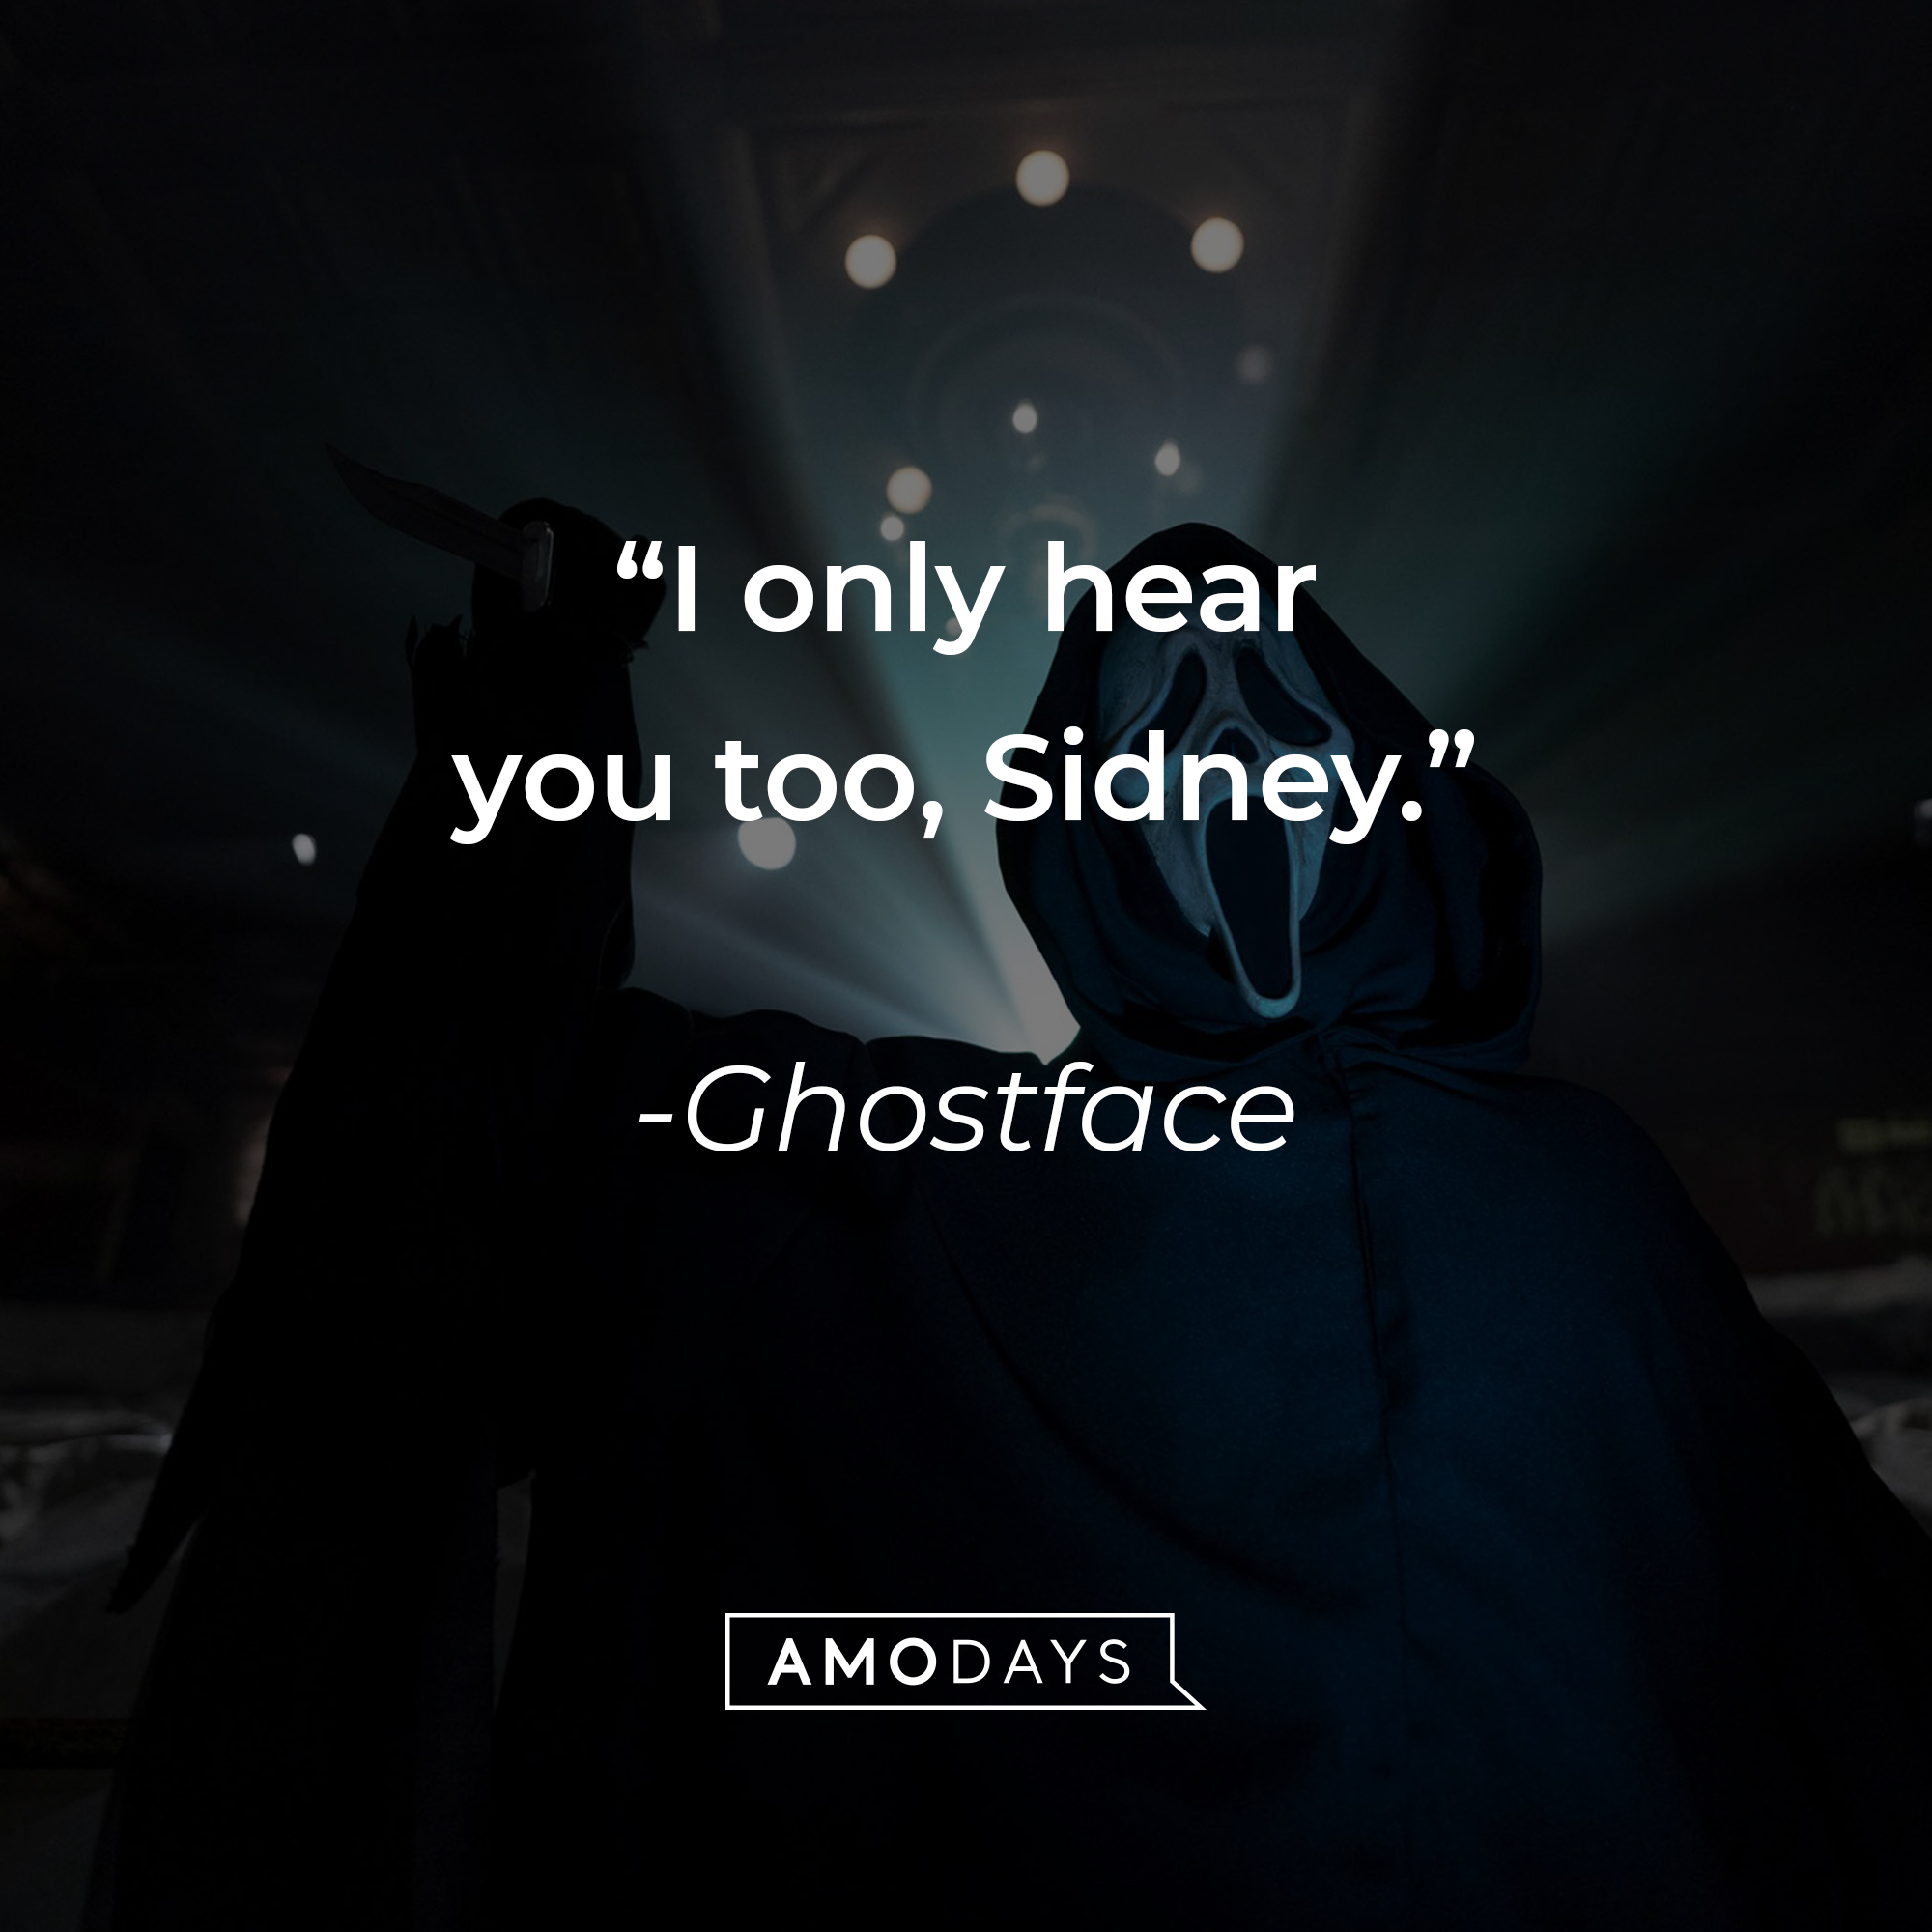 Ghostface with his quote, "I only hear you too, Sidney." | Source: Facebook/ScreamMovies